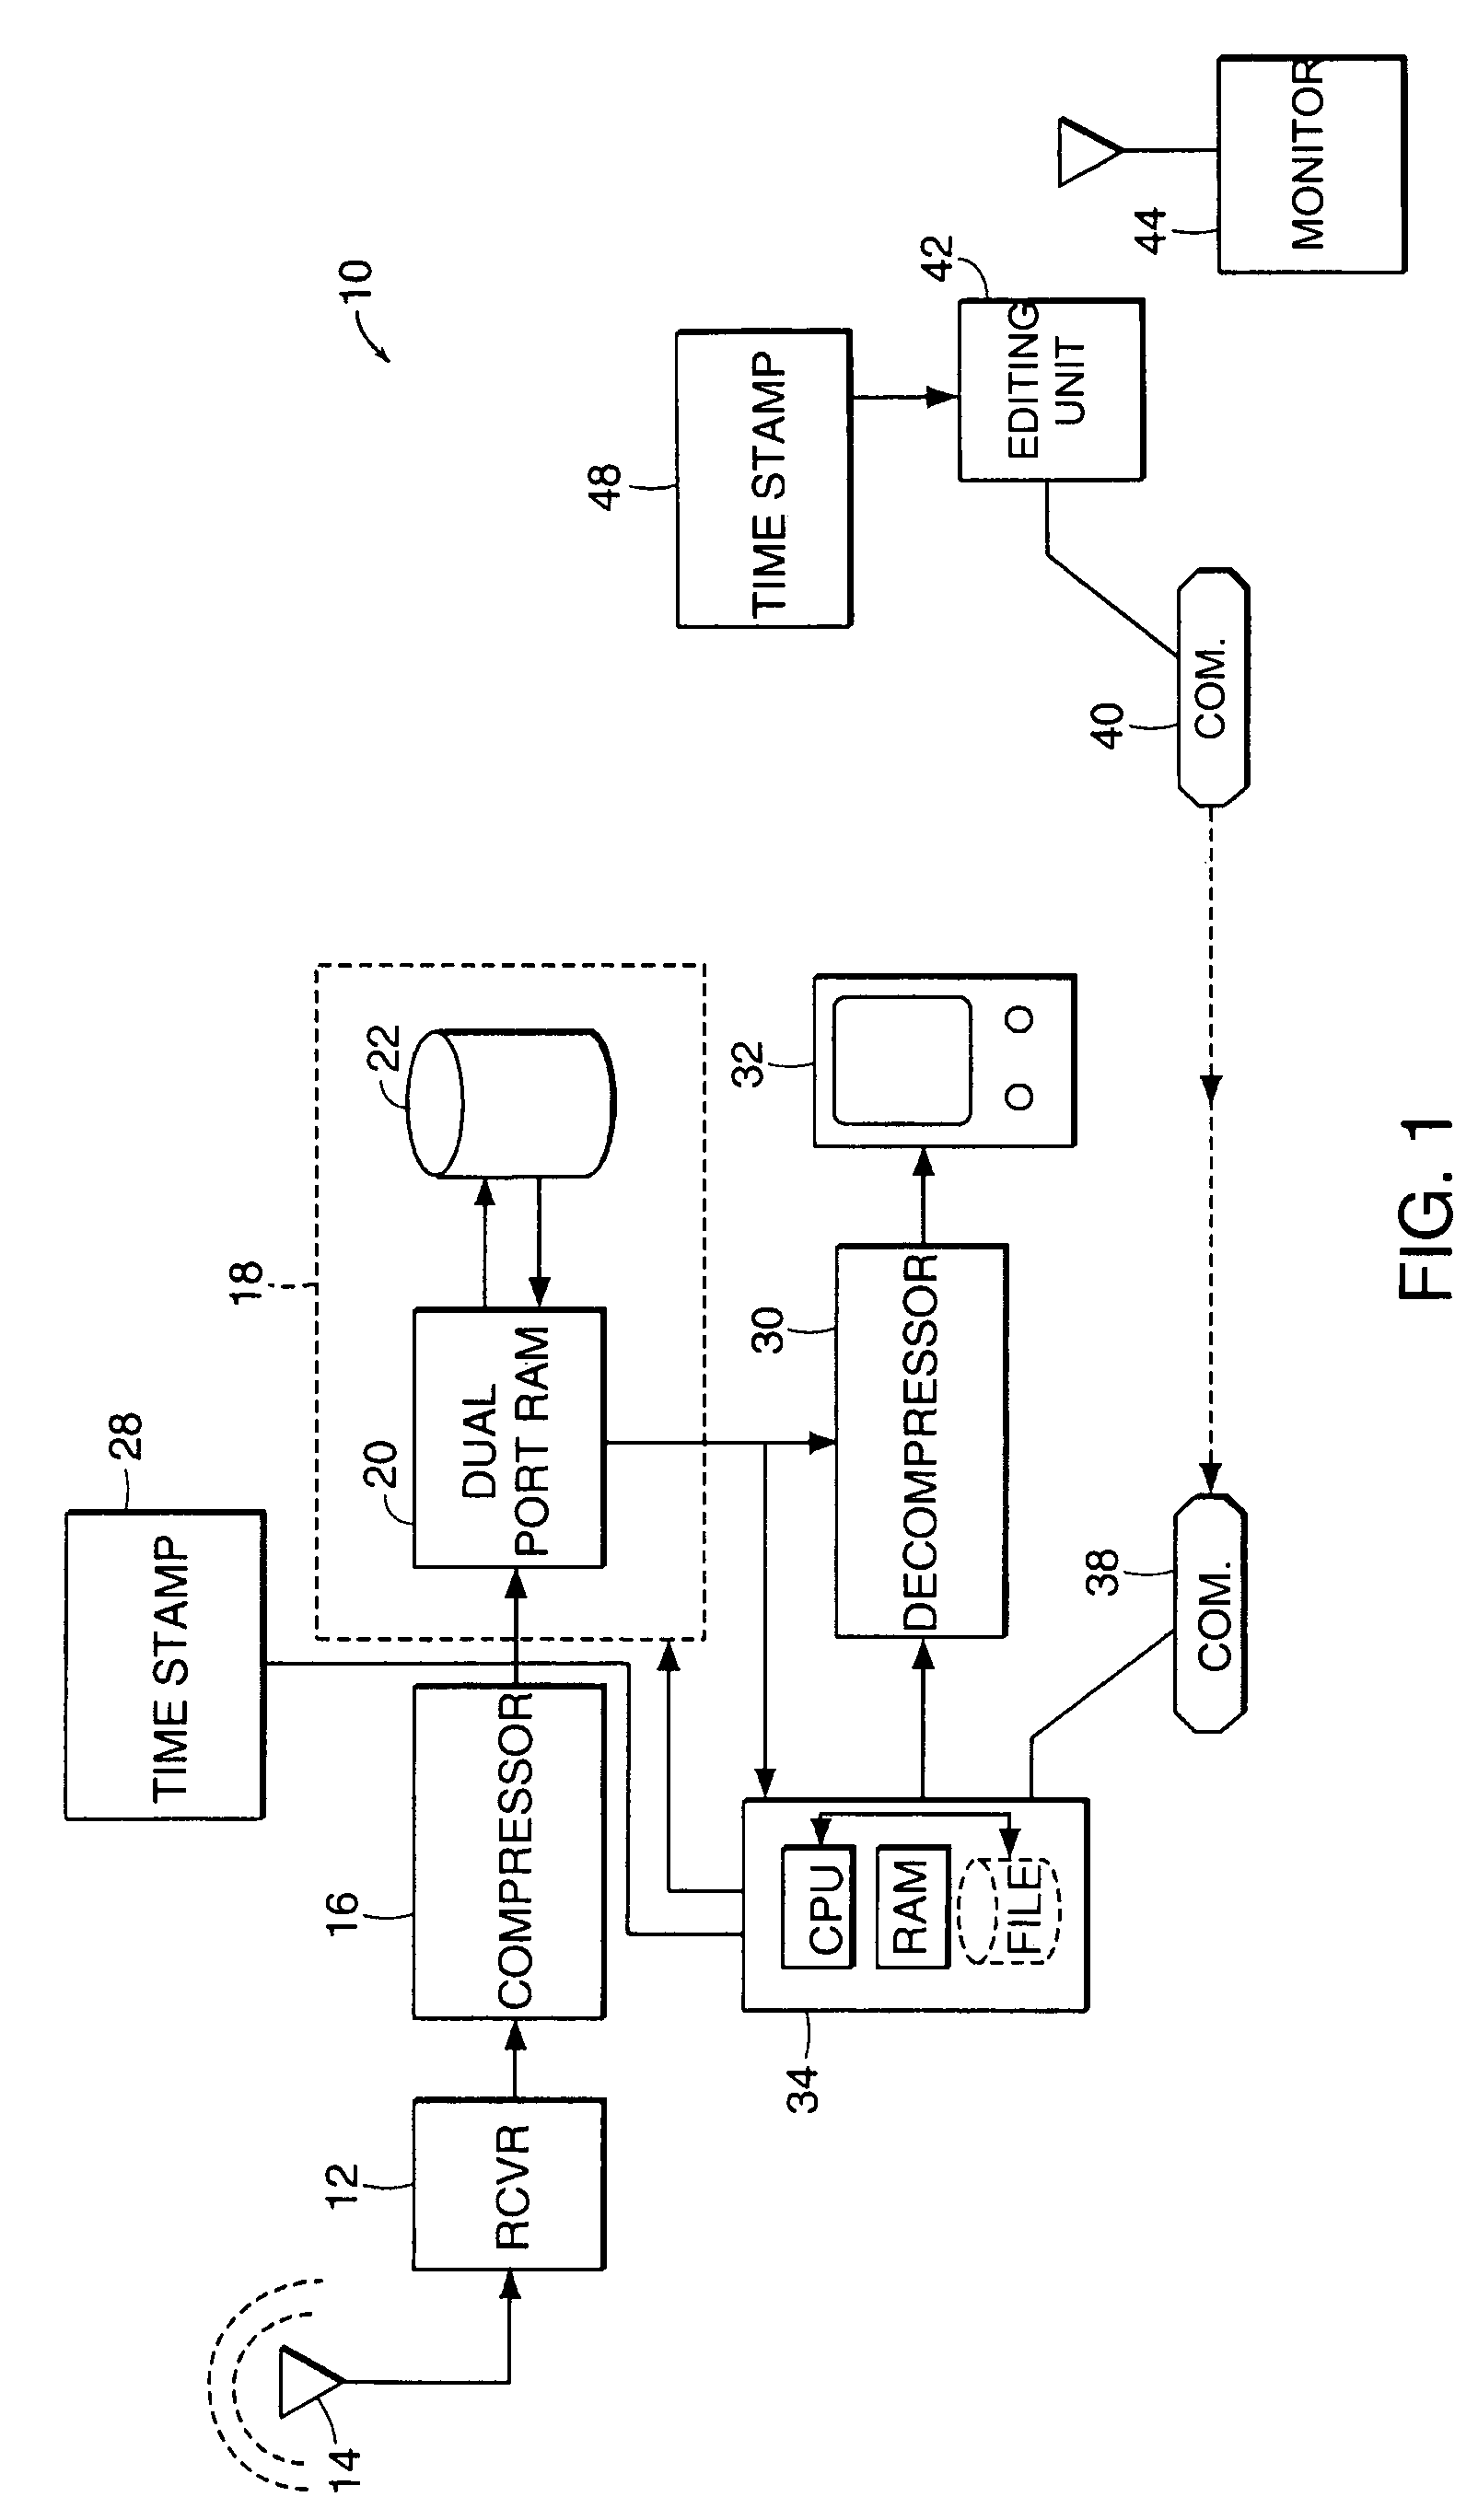 Apparatus and methods for broadcast monitoring